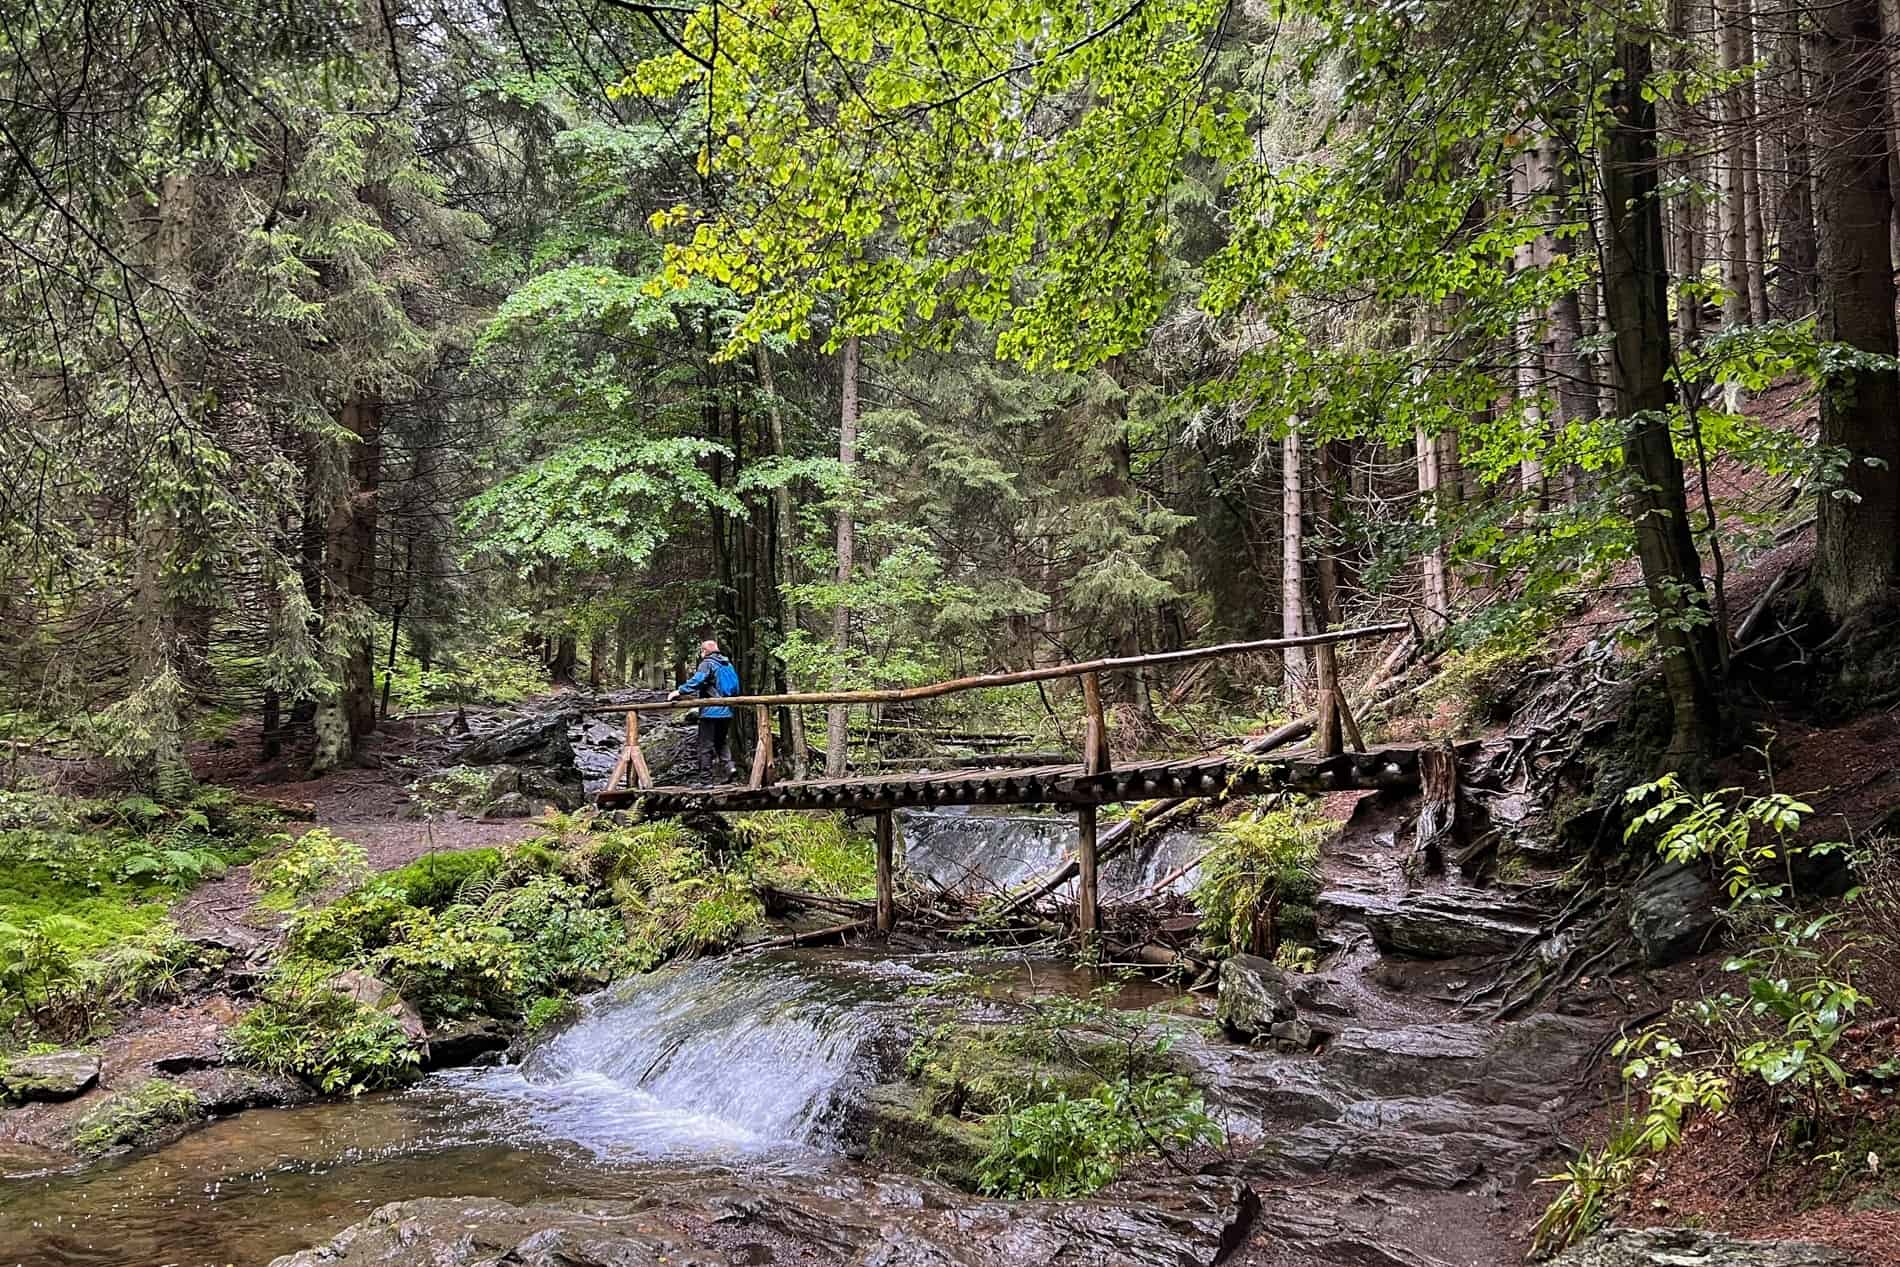 A man hikes across a wooden bridge in a forest in the Jeseníky mountains in the Czech Republic.